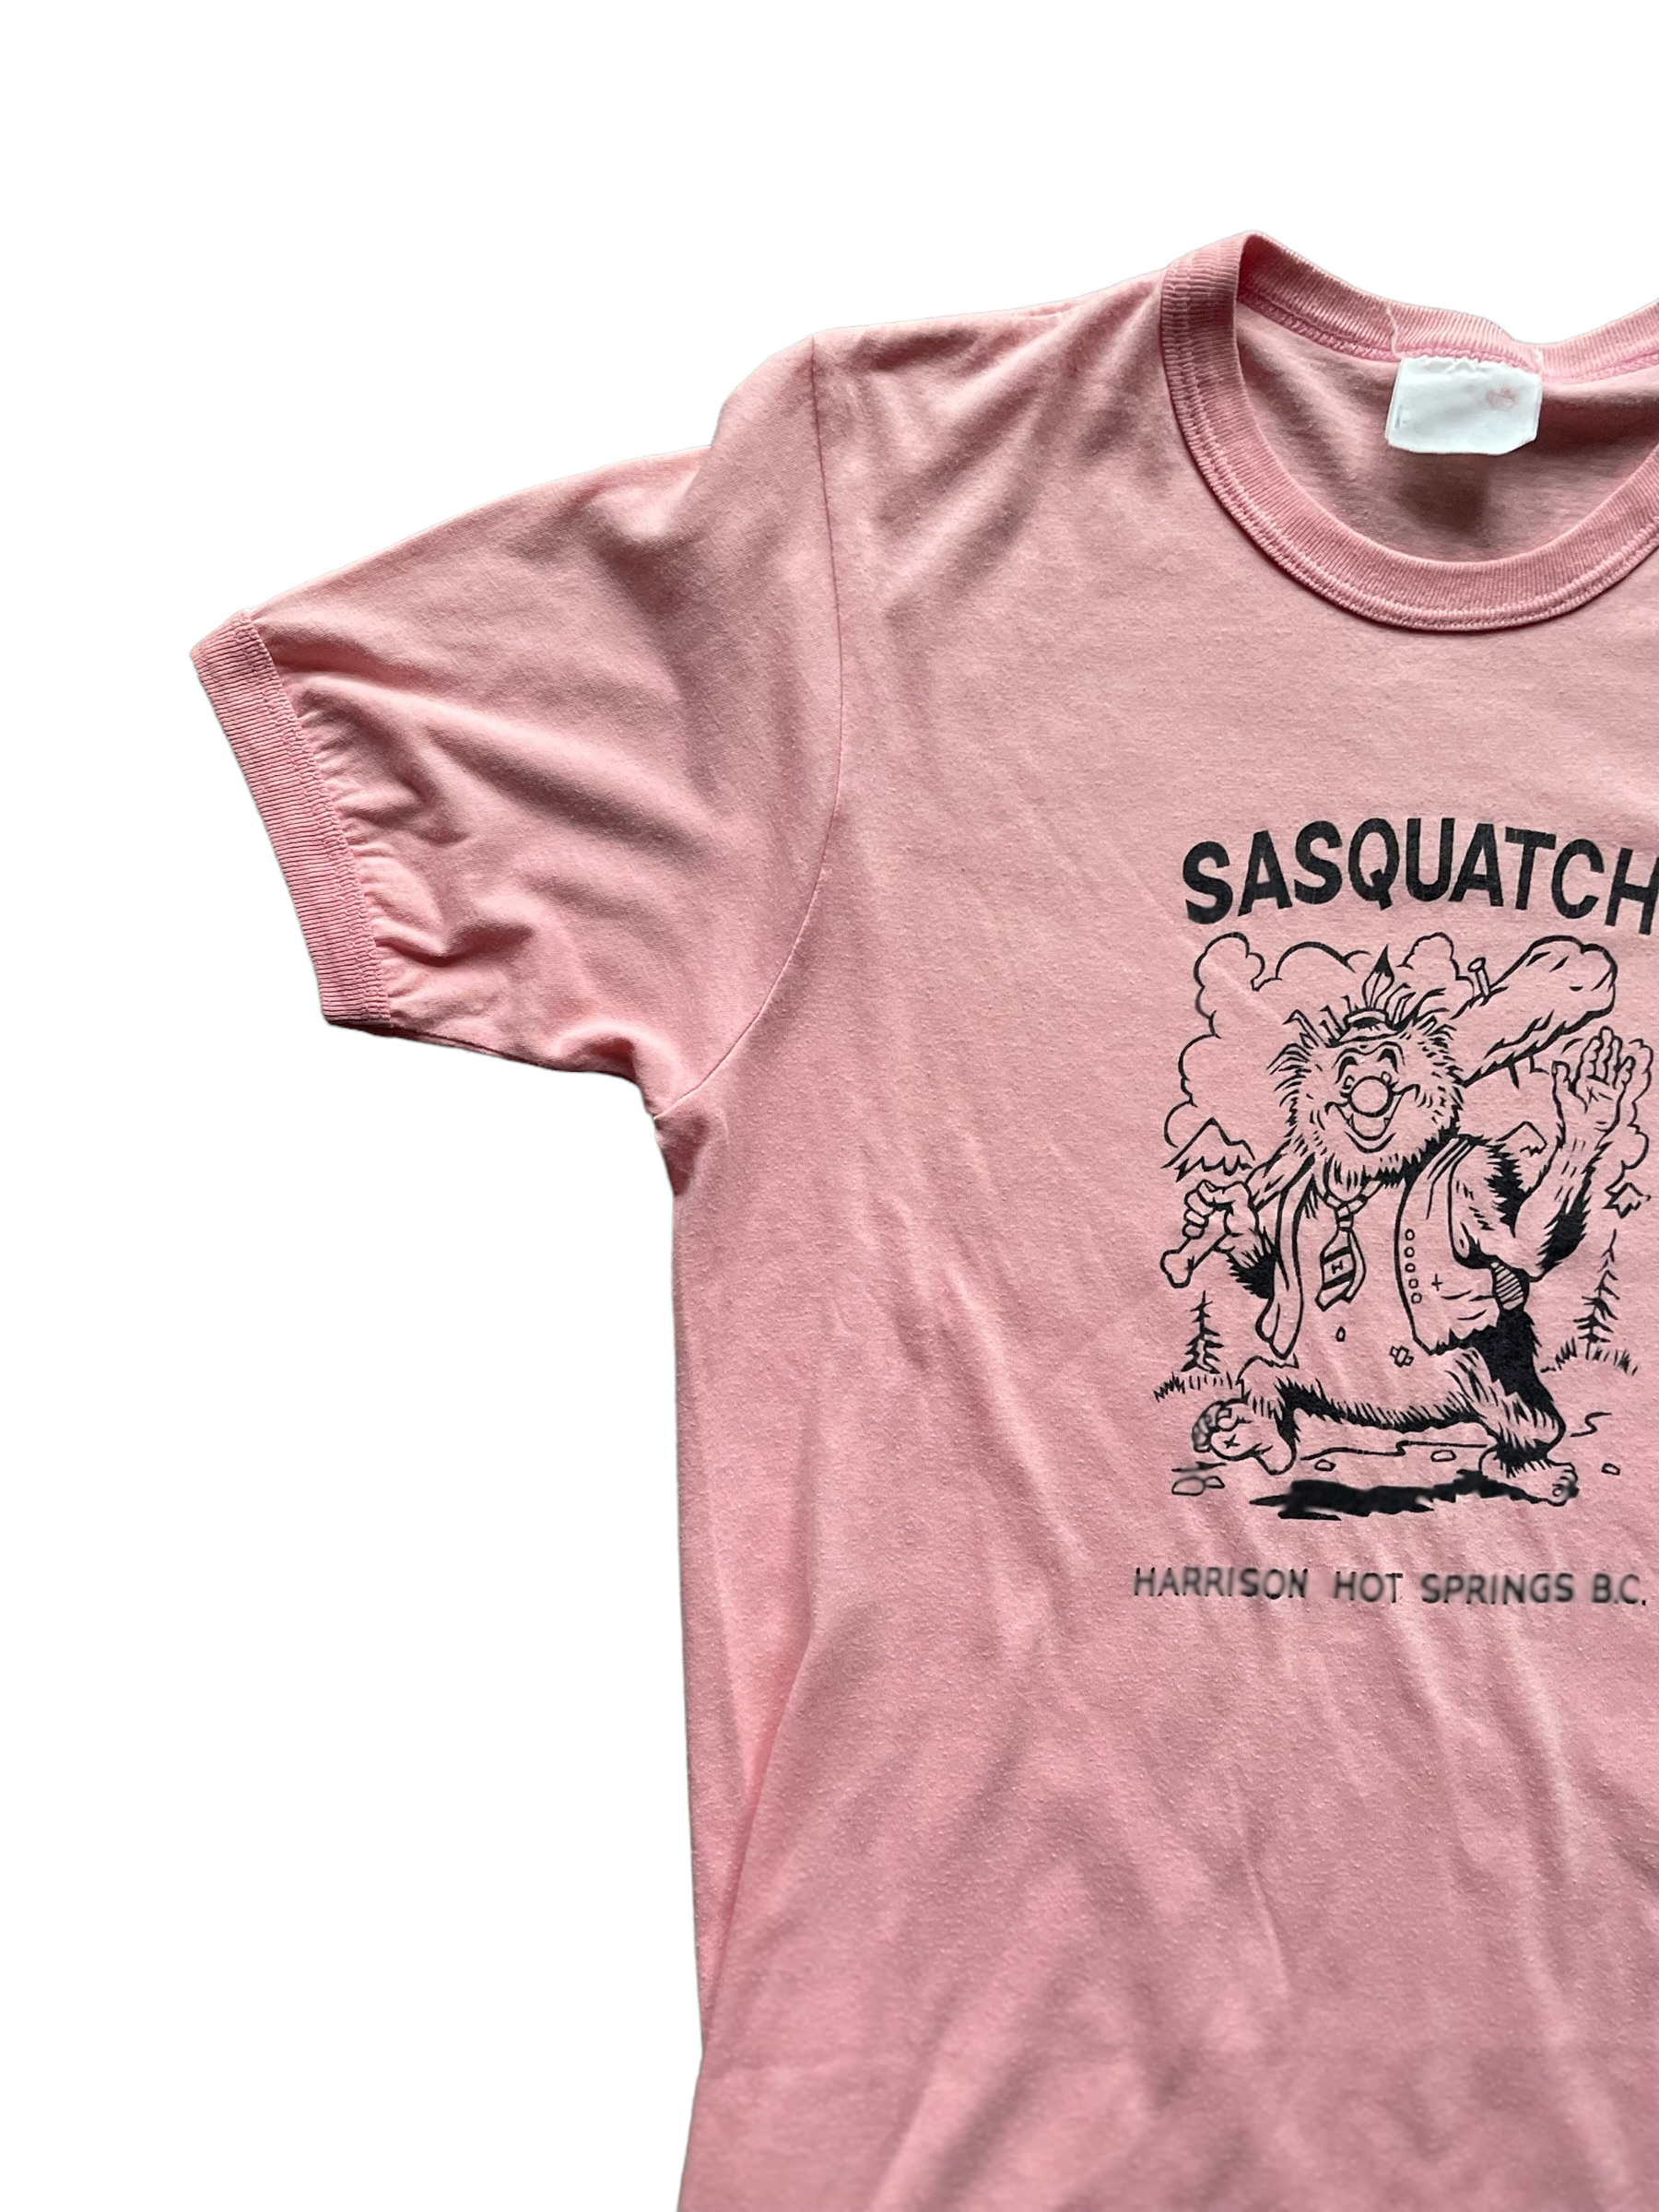 Right Front View of Vintage Sasquatch Harrison Hot Springs Pink Tee SZ M |  Vintage TShirt Seattle | Barn Owl Vintage Seattle